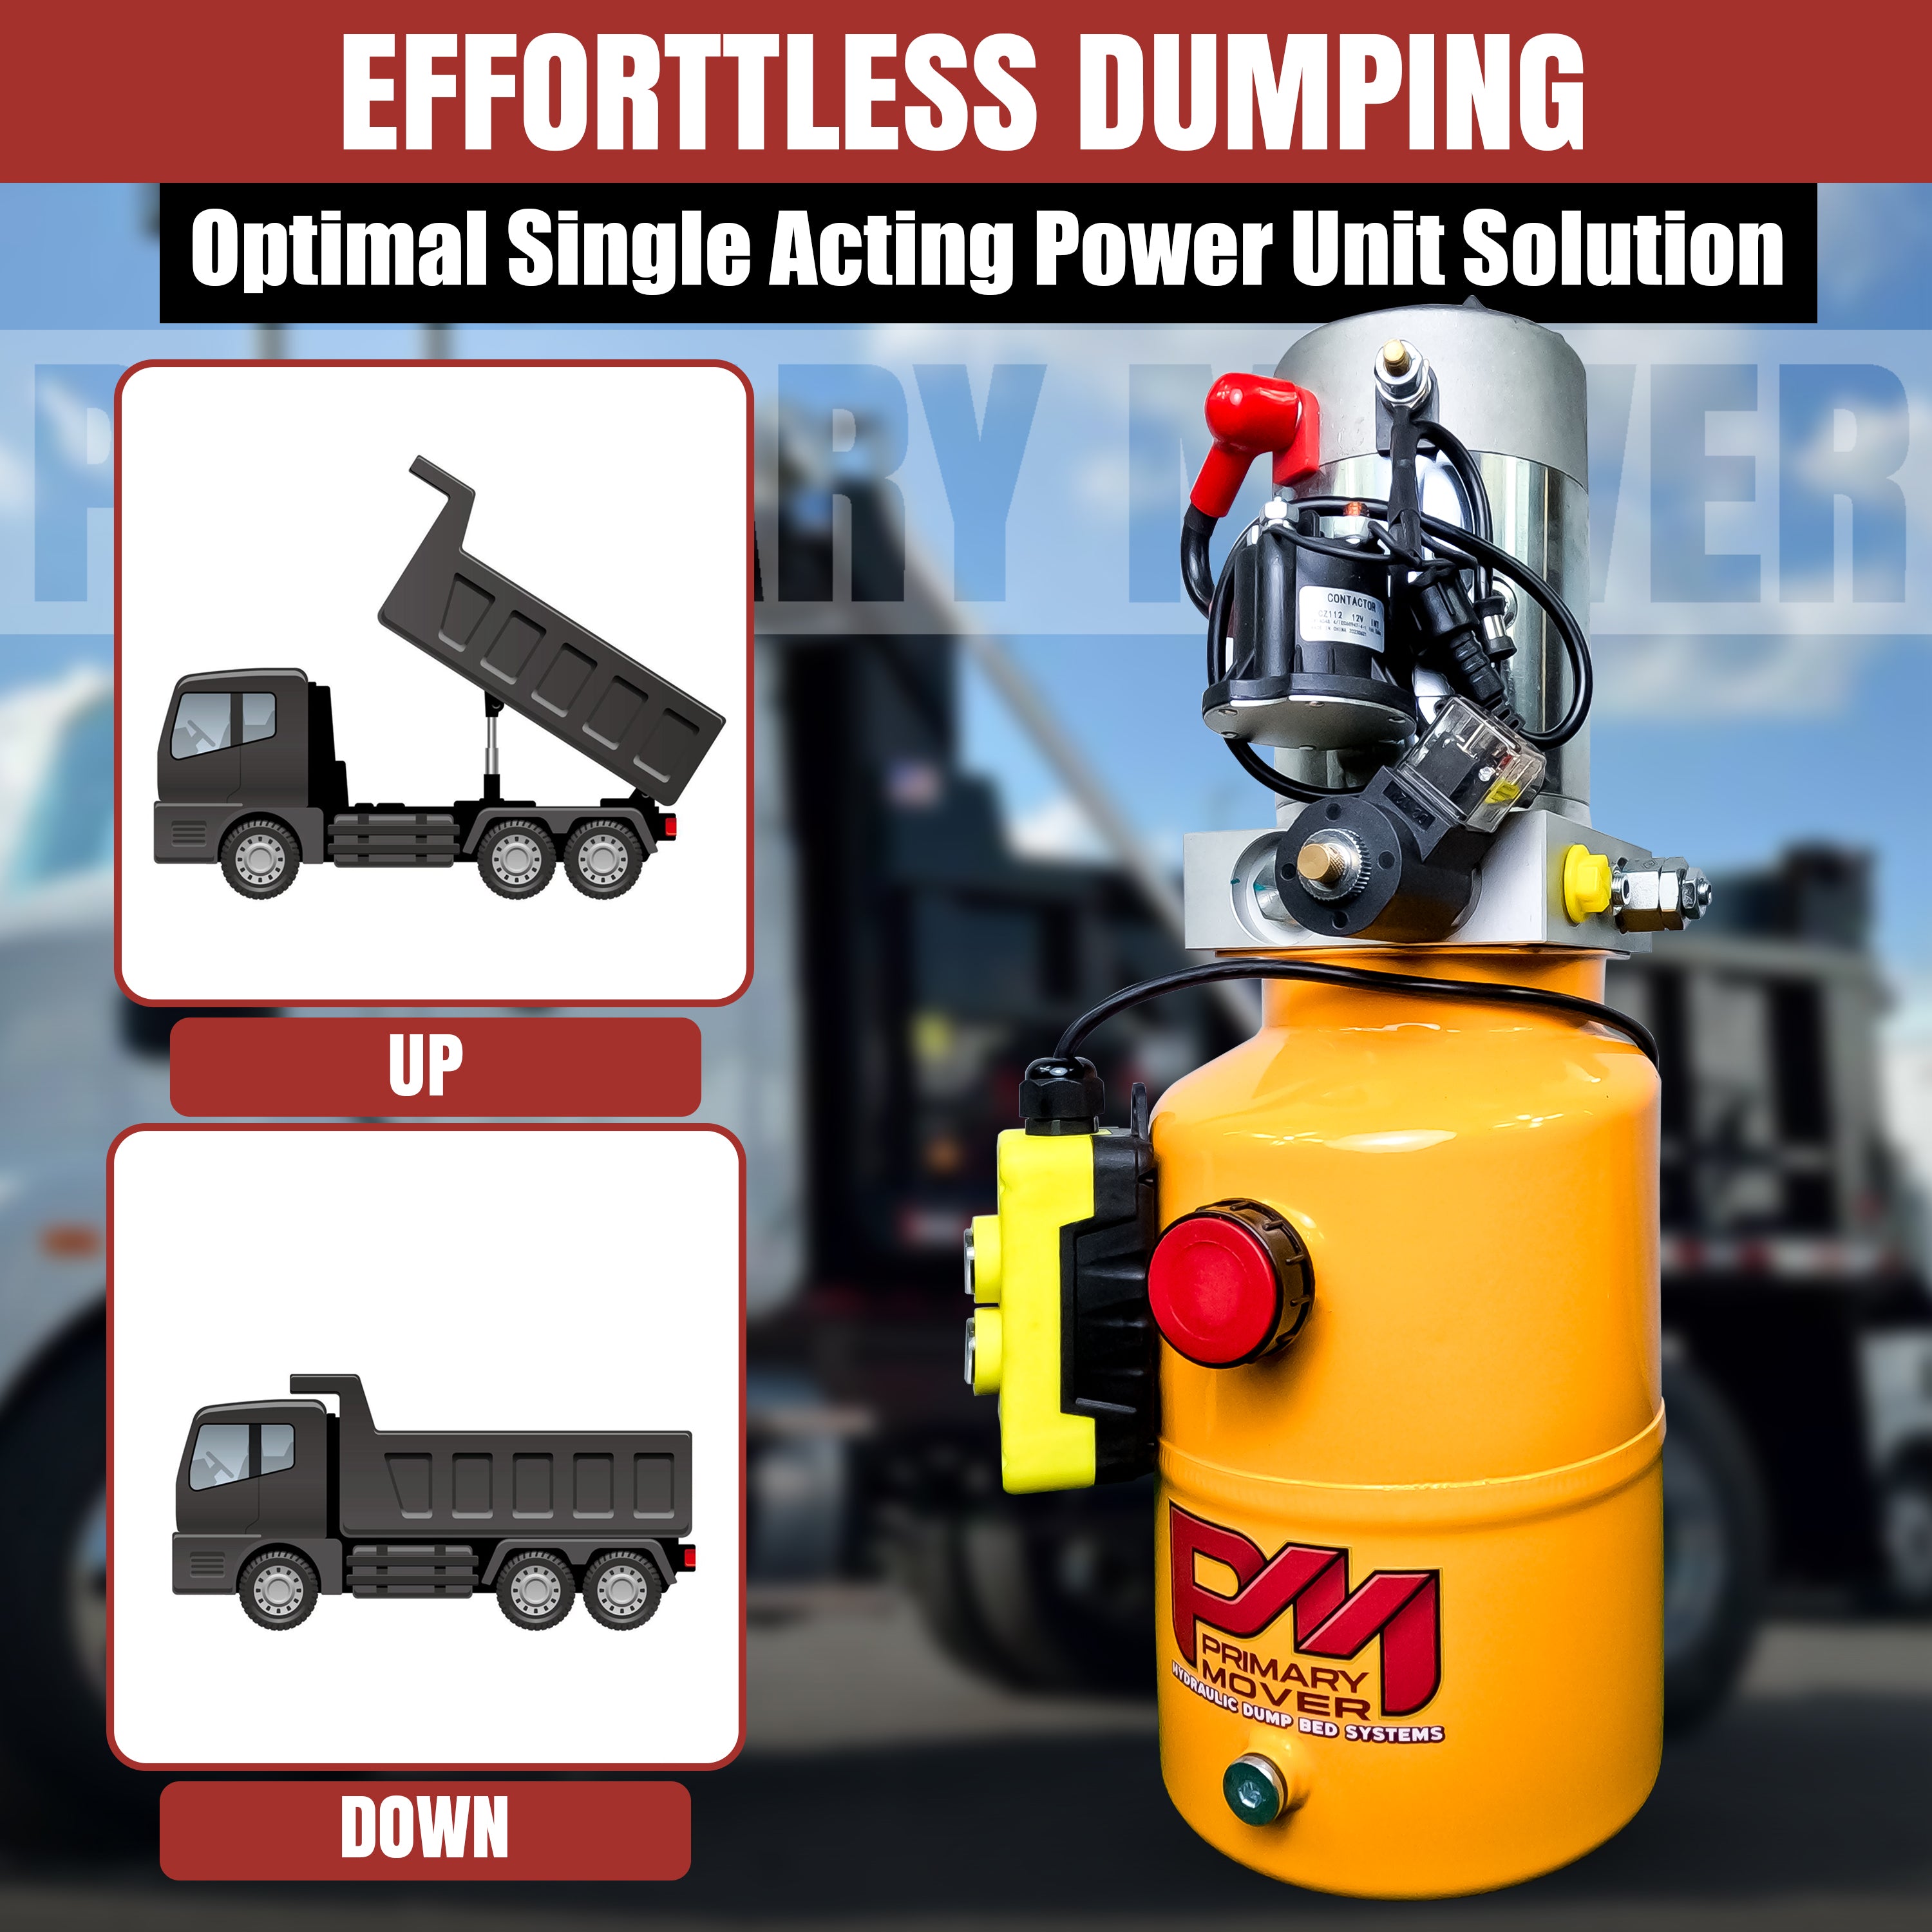 Primary Mover 12V Single-Acting Hydraulic Pump - Steel Reservoir for dump bed systems. Precision-crafted for efficiency and reliability in hydraulic applications.